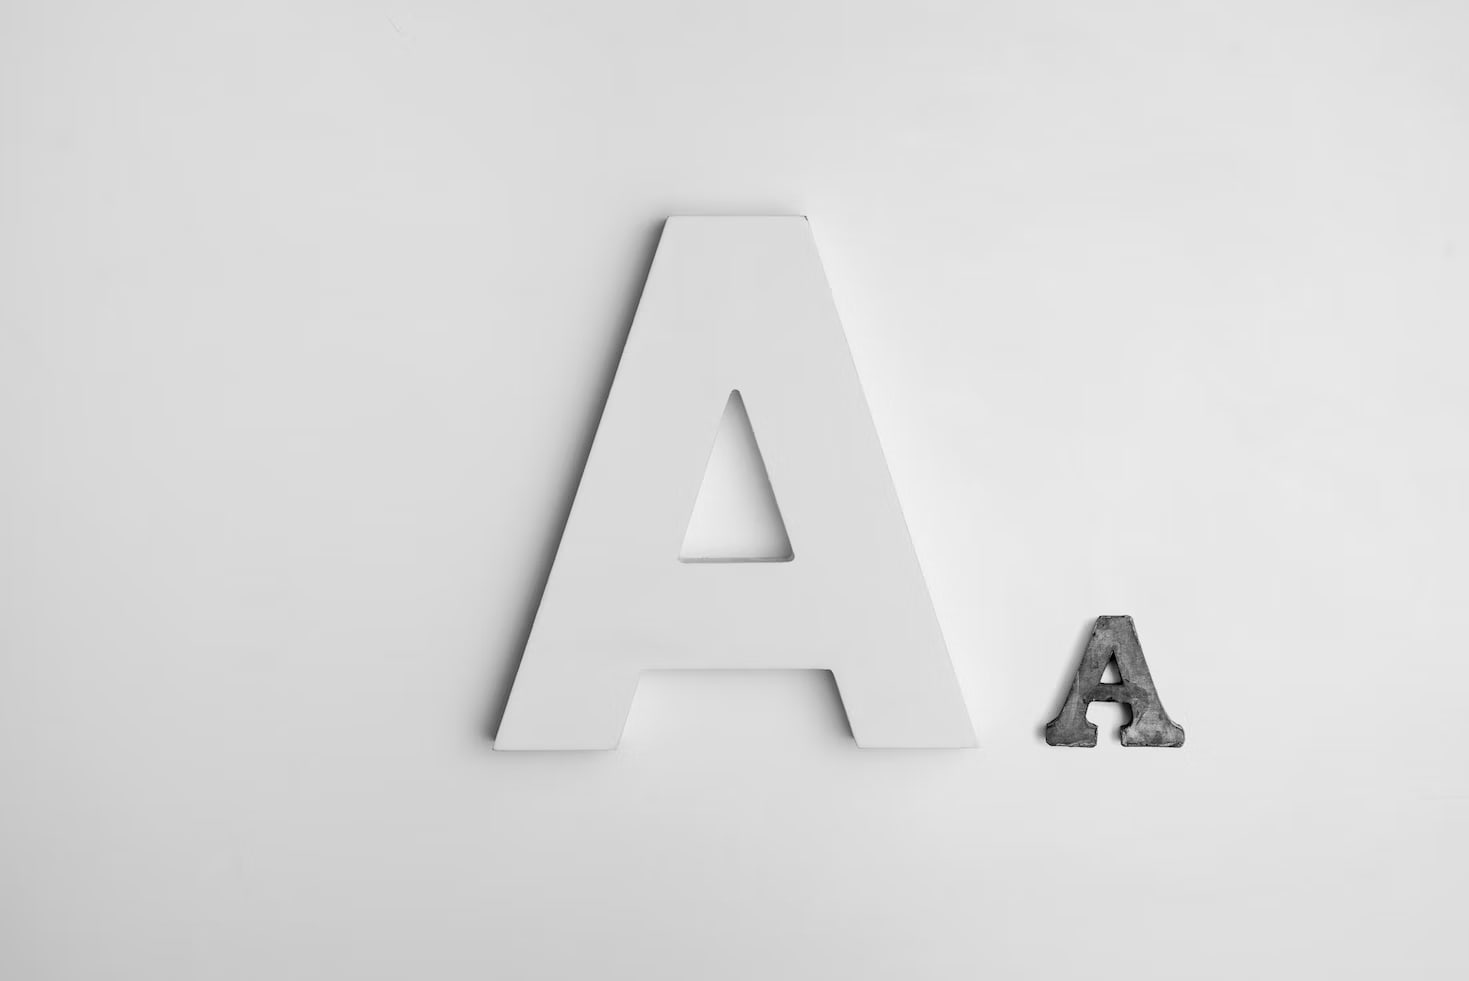 Big capital letter A next to a small capital letter A